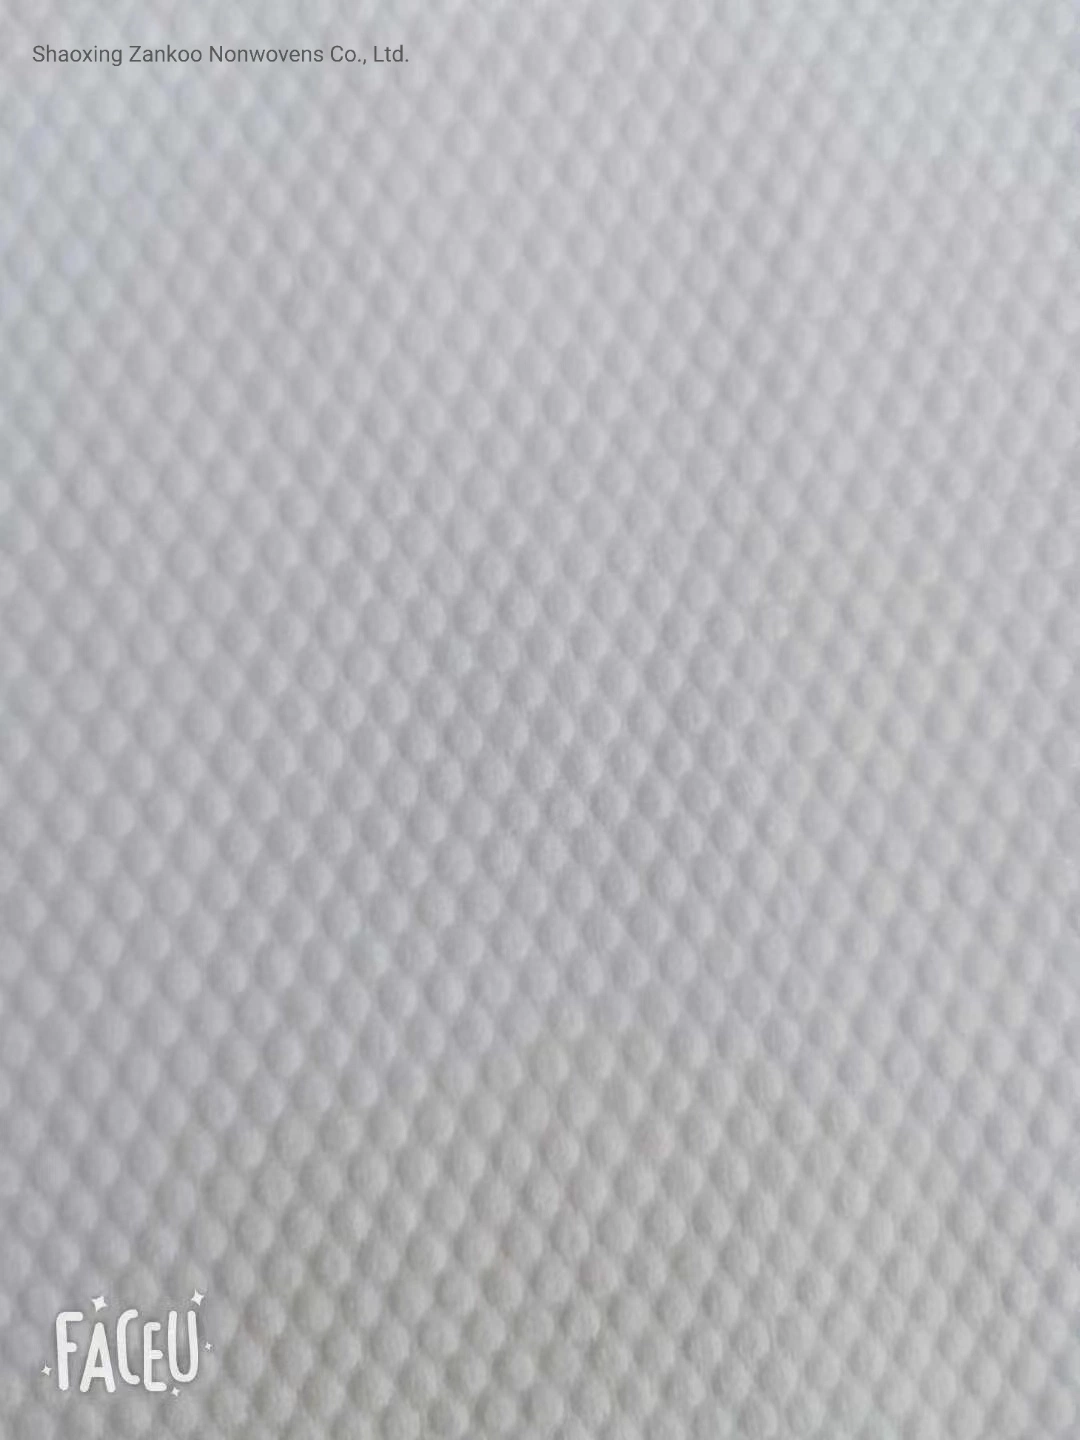 Plain /Embossed Spunlace Nonwoven Raw Material for Wet Wipes, Baby Wipes, Cleaning Wipes